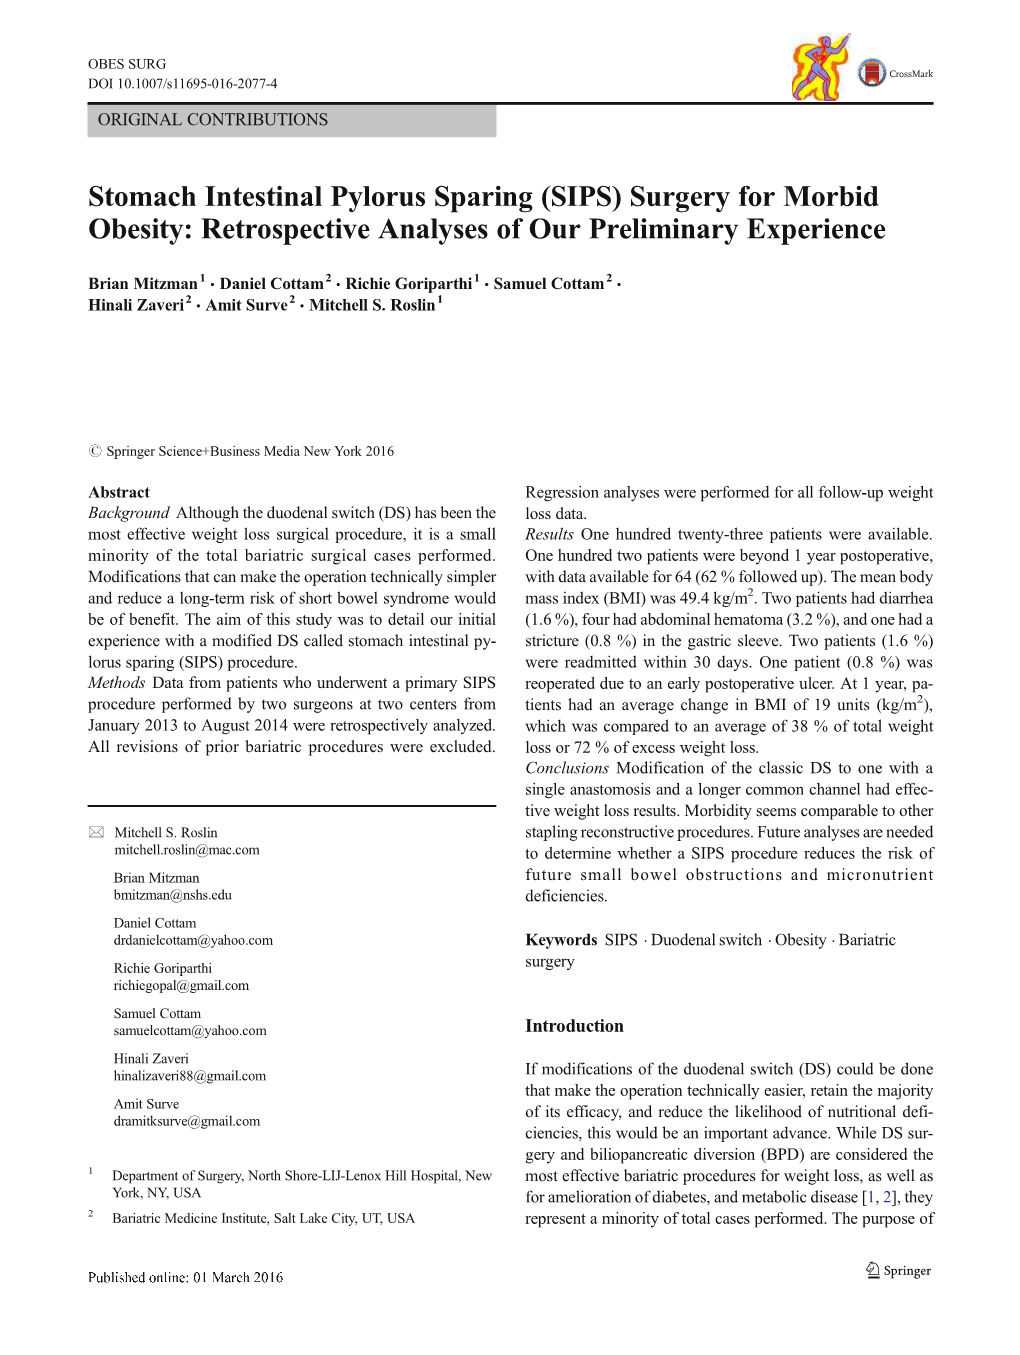 SIPS) Surgery for Morbid Obesity: Retrospective Analyses of Our Preliminary Experience